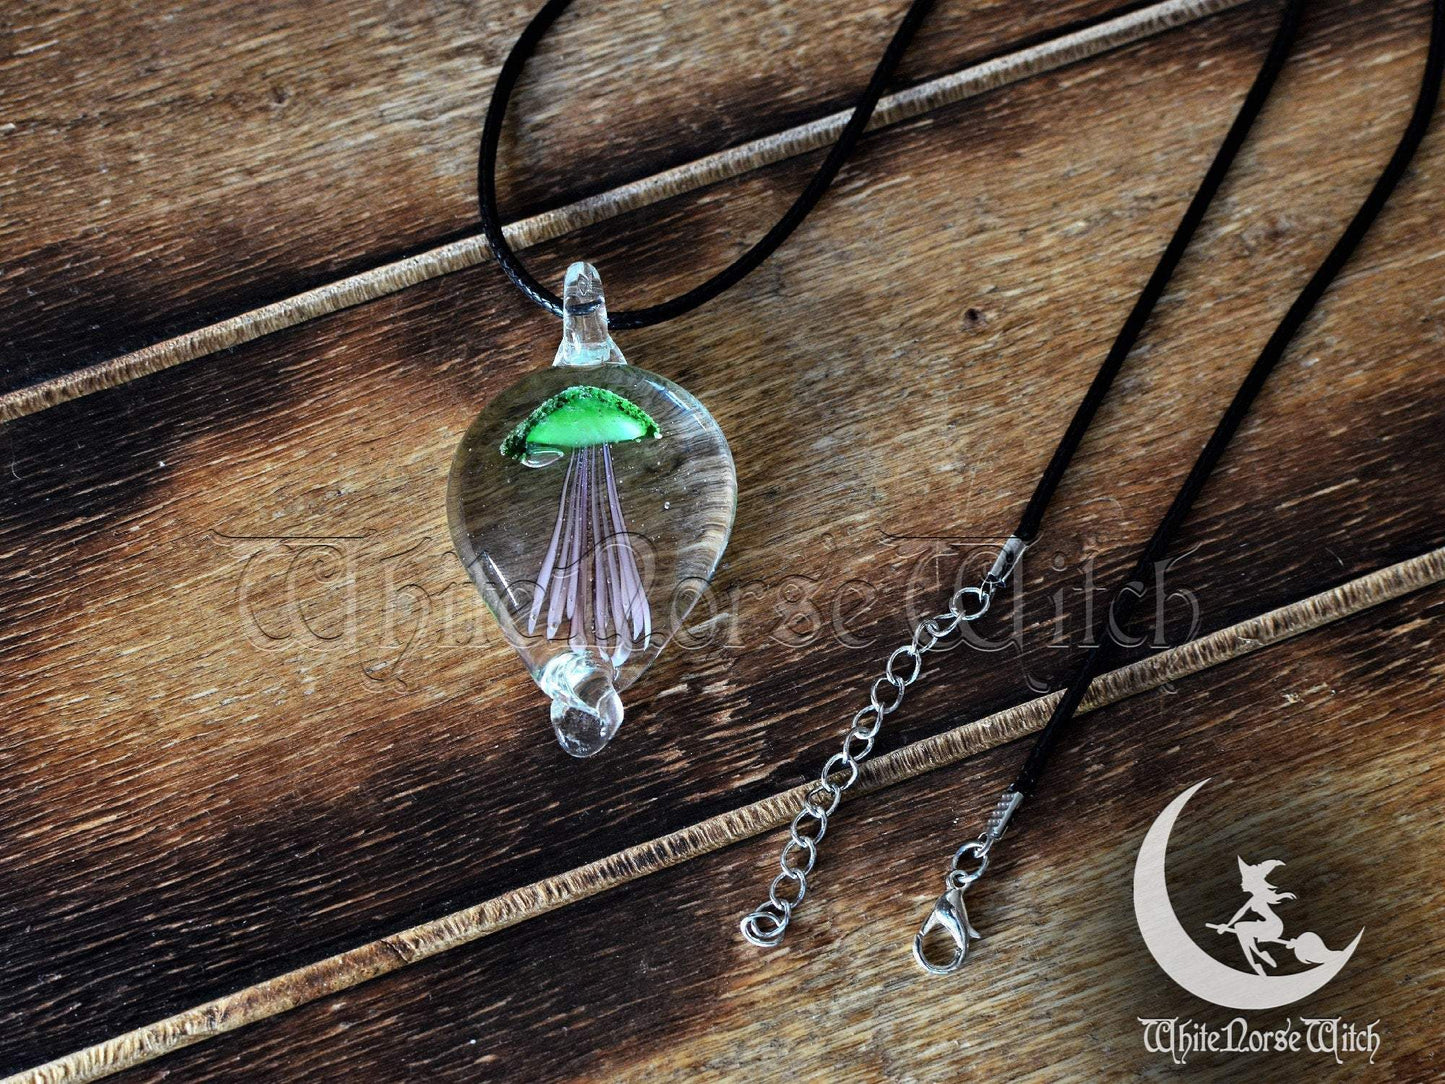 Jellyfish Necklace Mermaid Jewelry, Glowing Jellyfish Pendant, Magical Glow in the Dark Wish Charm, Jelly Fish Witchy Gift TheNorseWind